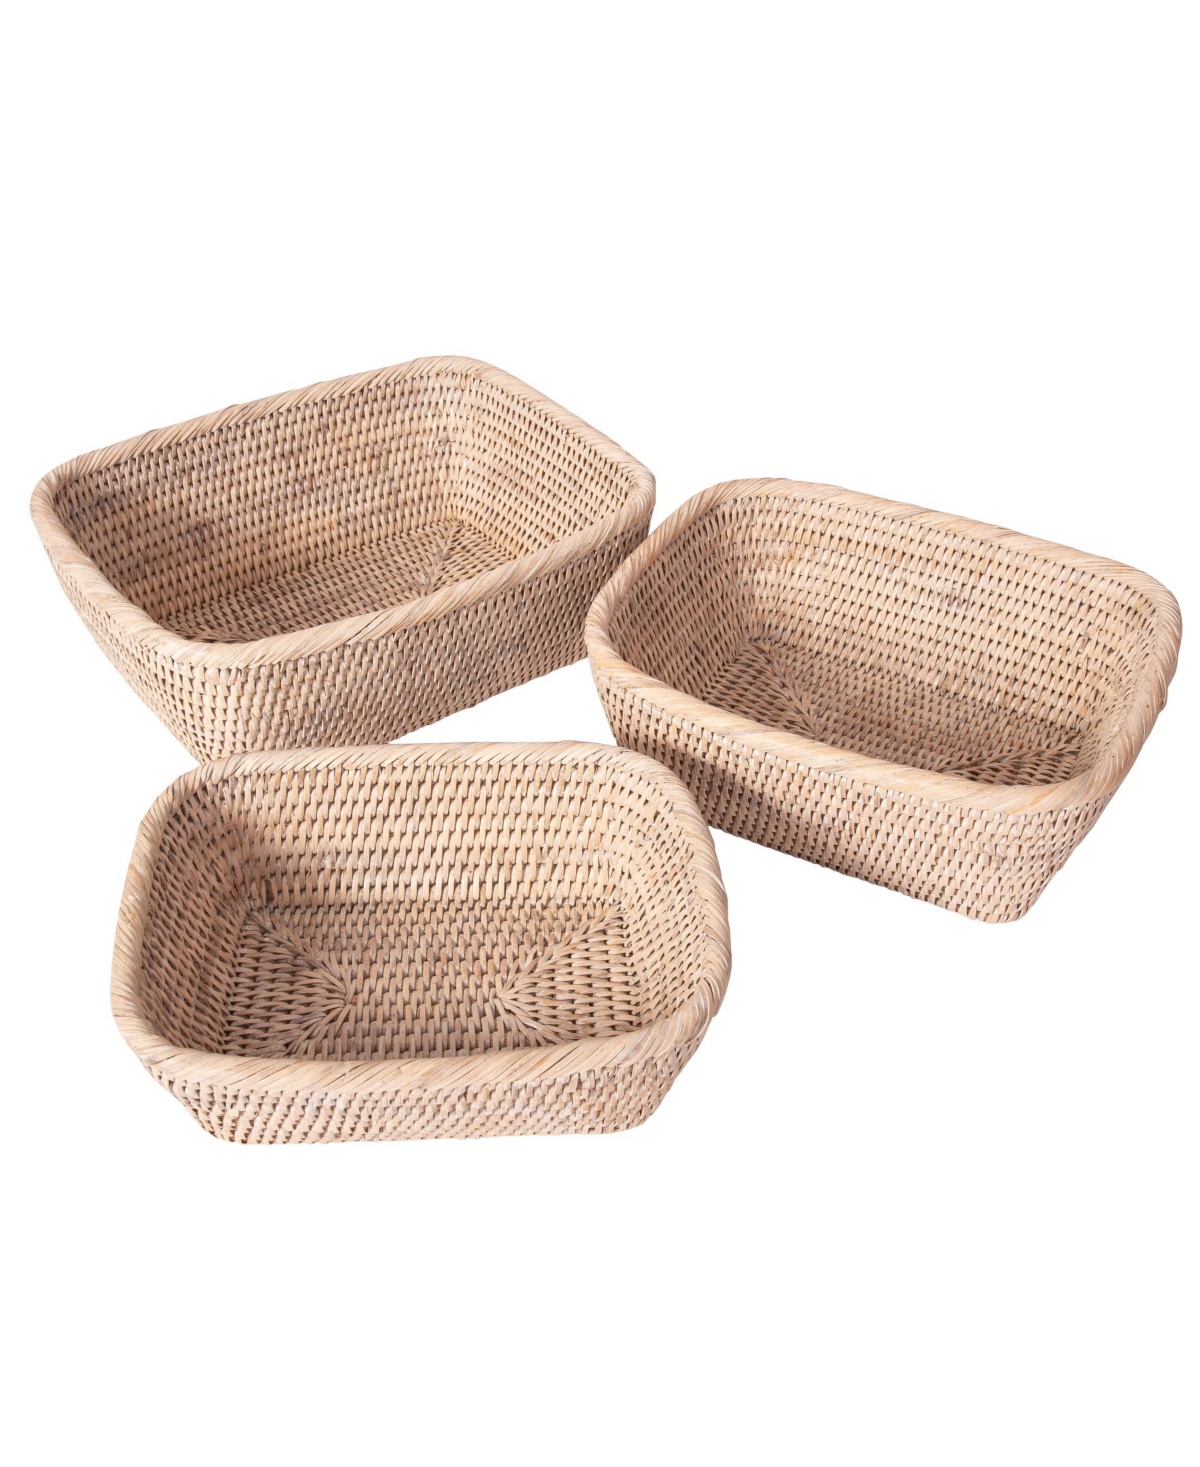 Artifacts Trading Company Artifacts Rattan 3 Piece Basket Set With Round Corners In Open White